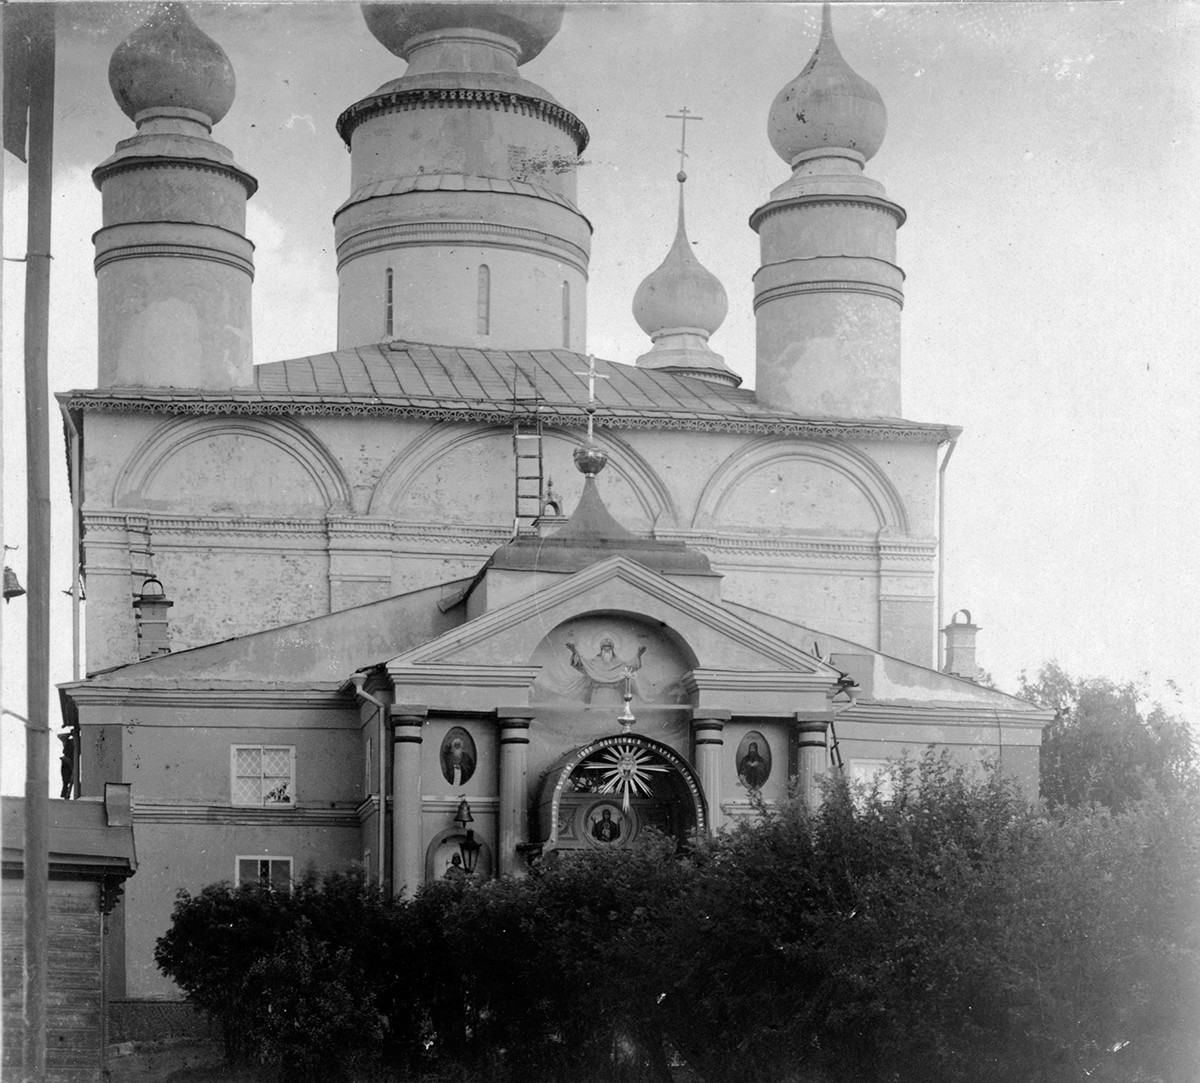 Cathedral of Sts. Boris & Gleb, west view. The flanking decorative wooden cupolas were placed on the roof in 1836 and removed in 1925 by the architect and preservation specialist Piotr Baranovsky. Summer 1911